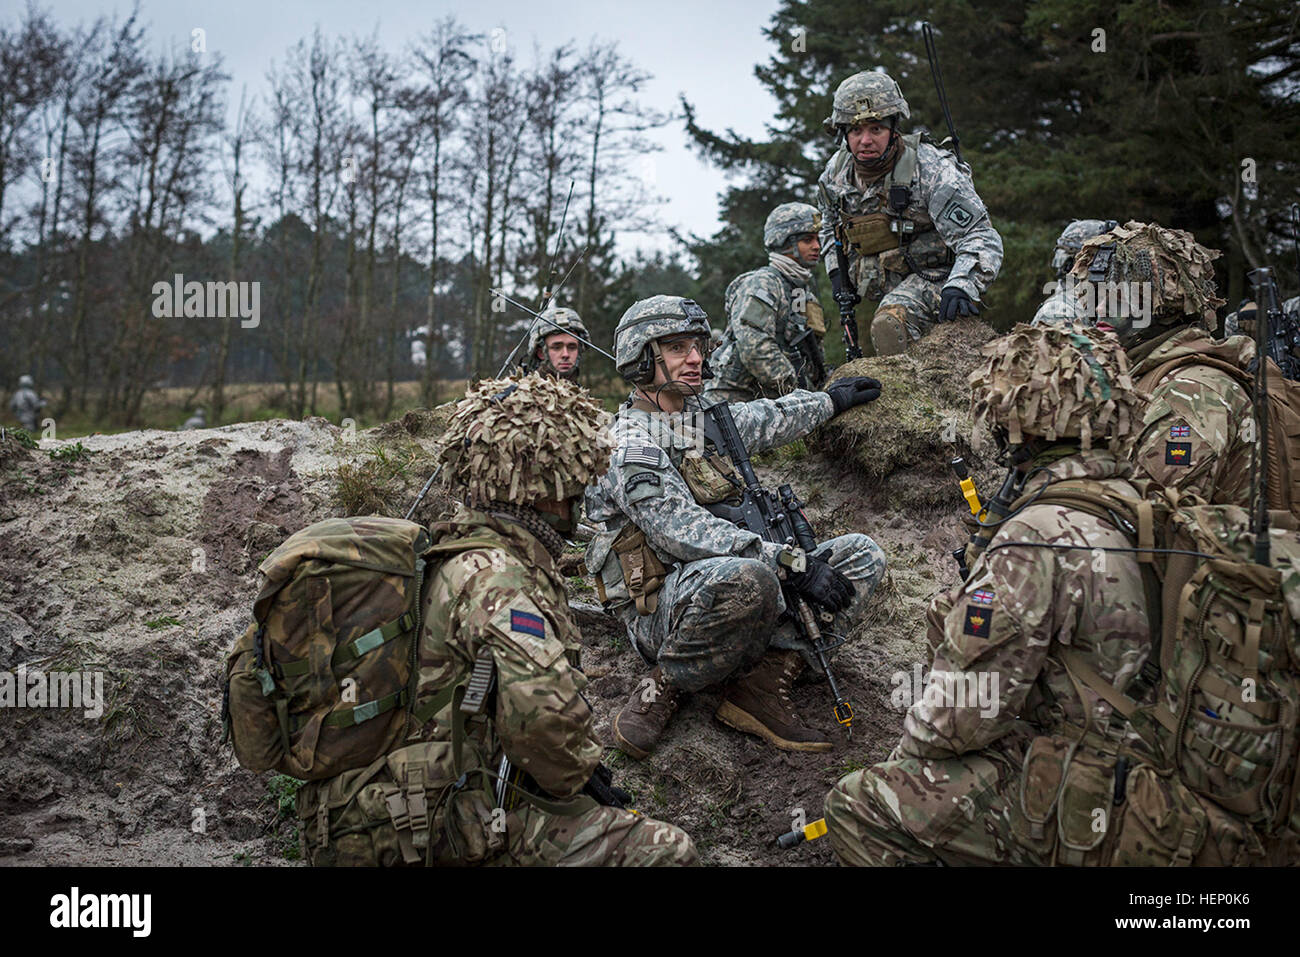 U.S. Army Capt. Nicolas Salimbene (seated, center), commander of Company B, 1st Battalion, 503rd Infantry Regiment, 173rd Airborne Brigade, directs British soldiers from Queens Company, Grenadier Guards where to attack the opposing force during Exercise White Sword here, Dec. 3, 2014. Exercise White Sword is a multinational exercise involving over 1,500 NATO troops from Denmark, U.K. and the U.S., and designed increase interoperability between allied forces and certify the Danish 2nd Brigade RBG for the 2015 NATO Reaction Force. (U.S. Army photo by Sgt. Benjamin John) Exercise White Sword 1412 Stock Photo